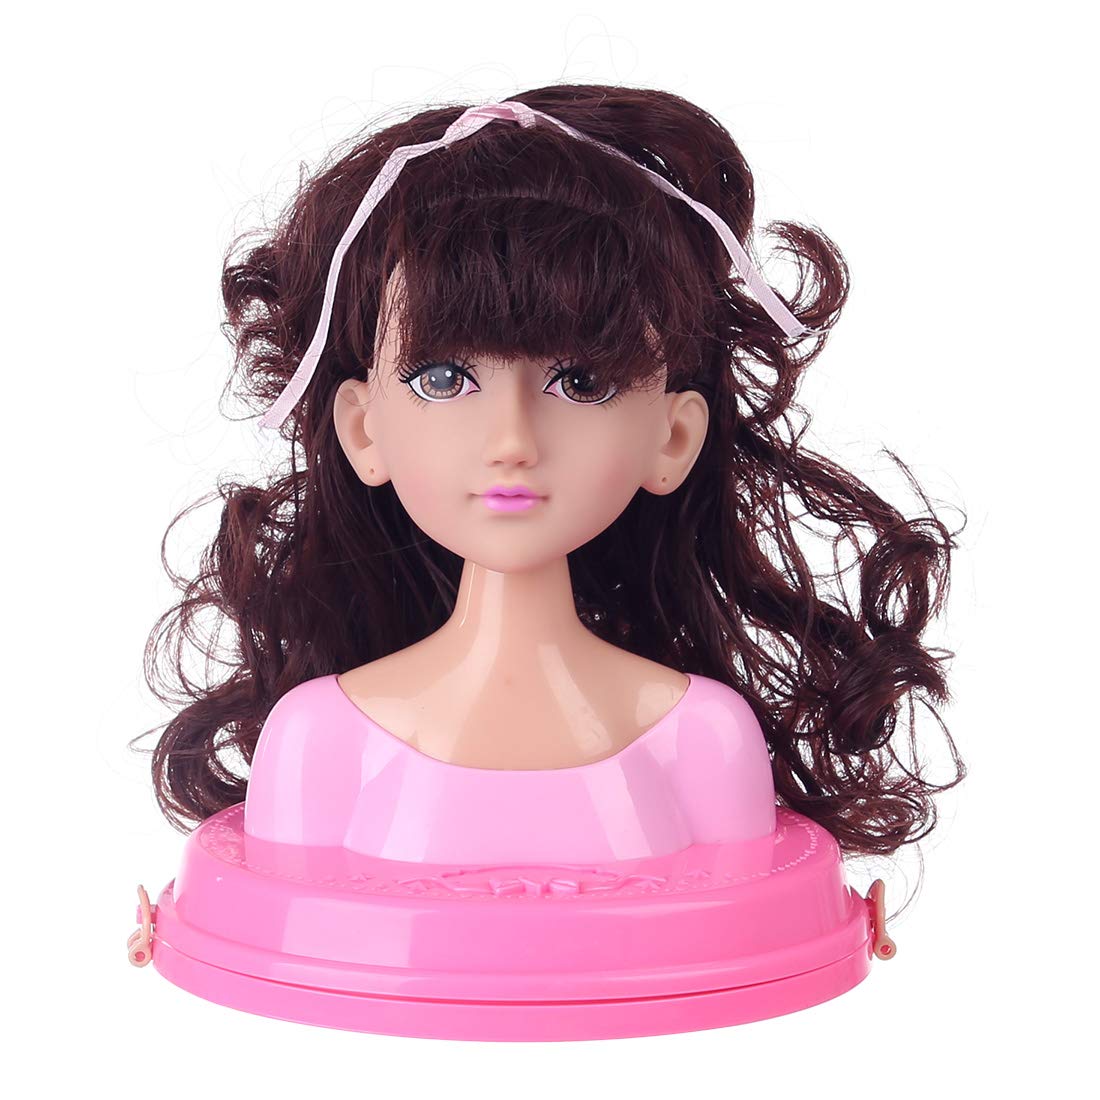 Topoo Styling Head Doll for Girls, Makeup Hairstyle Pretend Play Set with Styling Accessories for Kids Type C